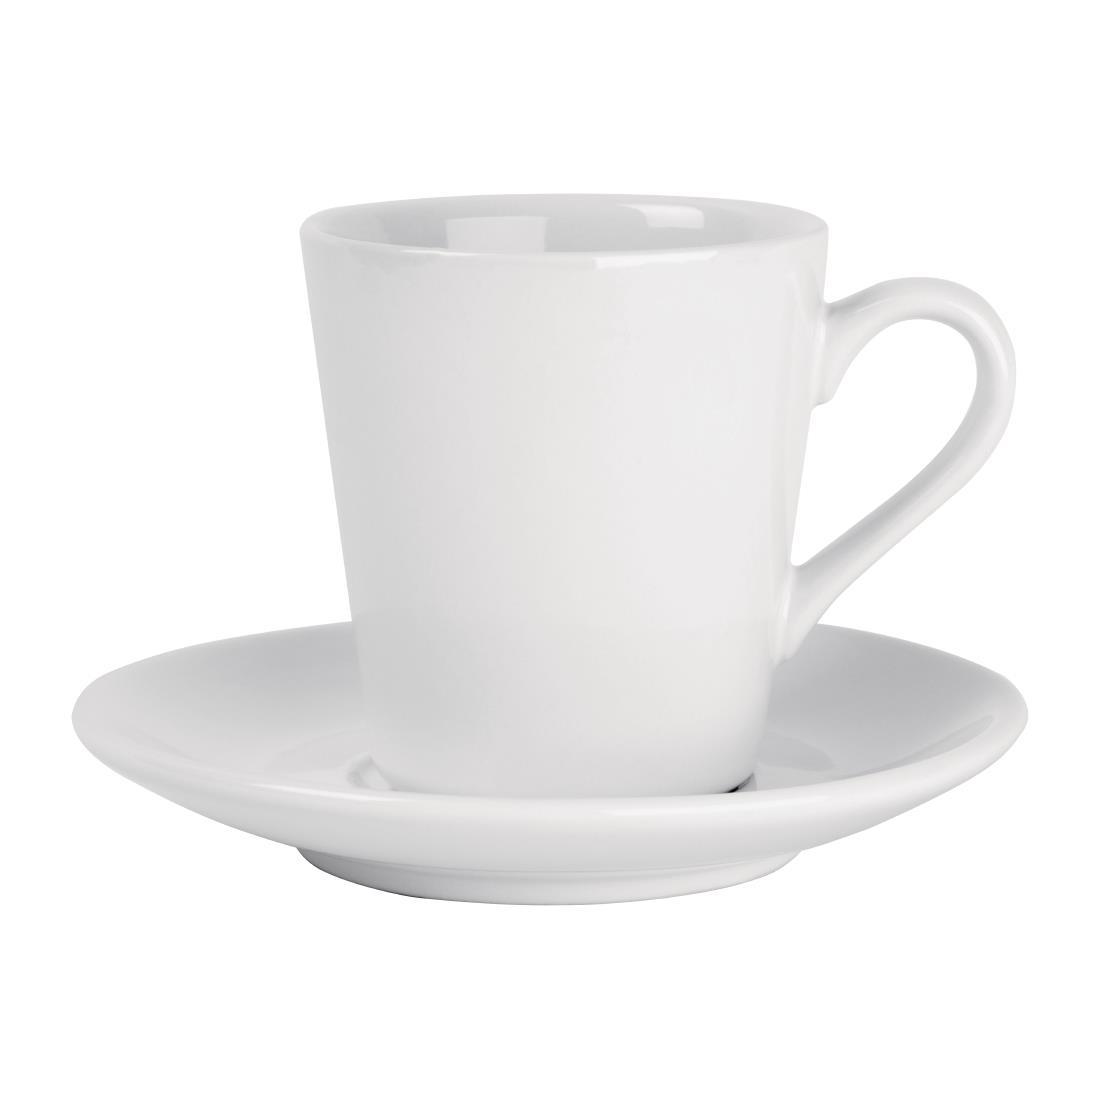 Olympia Cafe Flat White Cups White 170ml (Pack of 12) - FF991  - 4